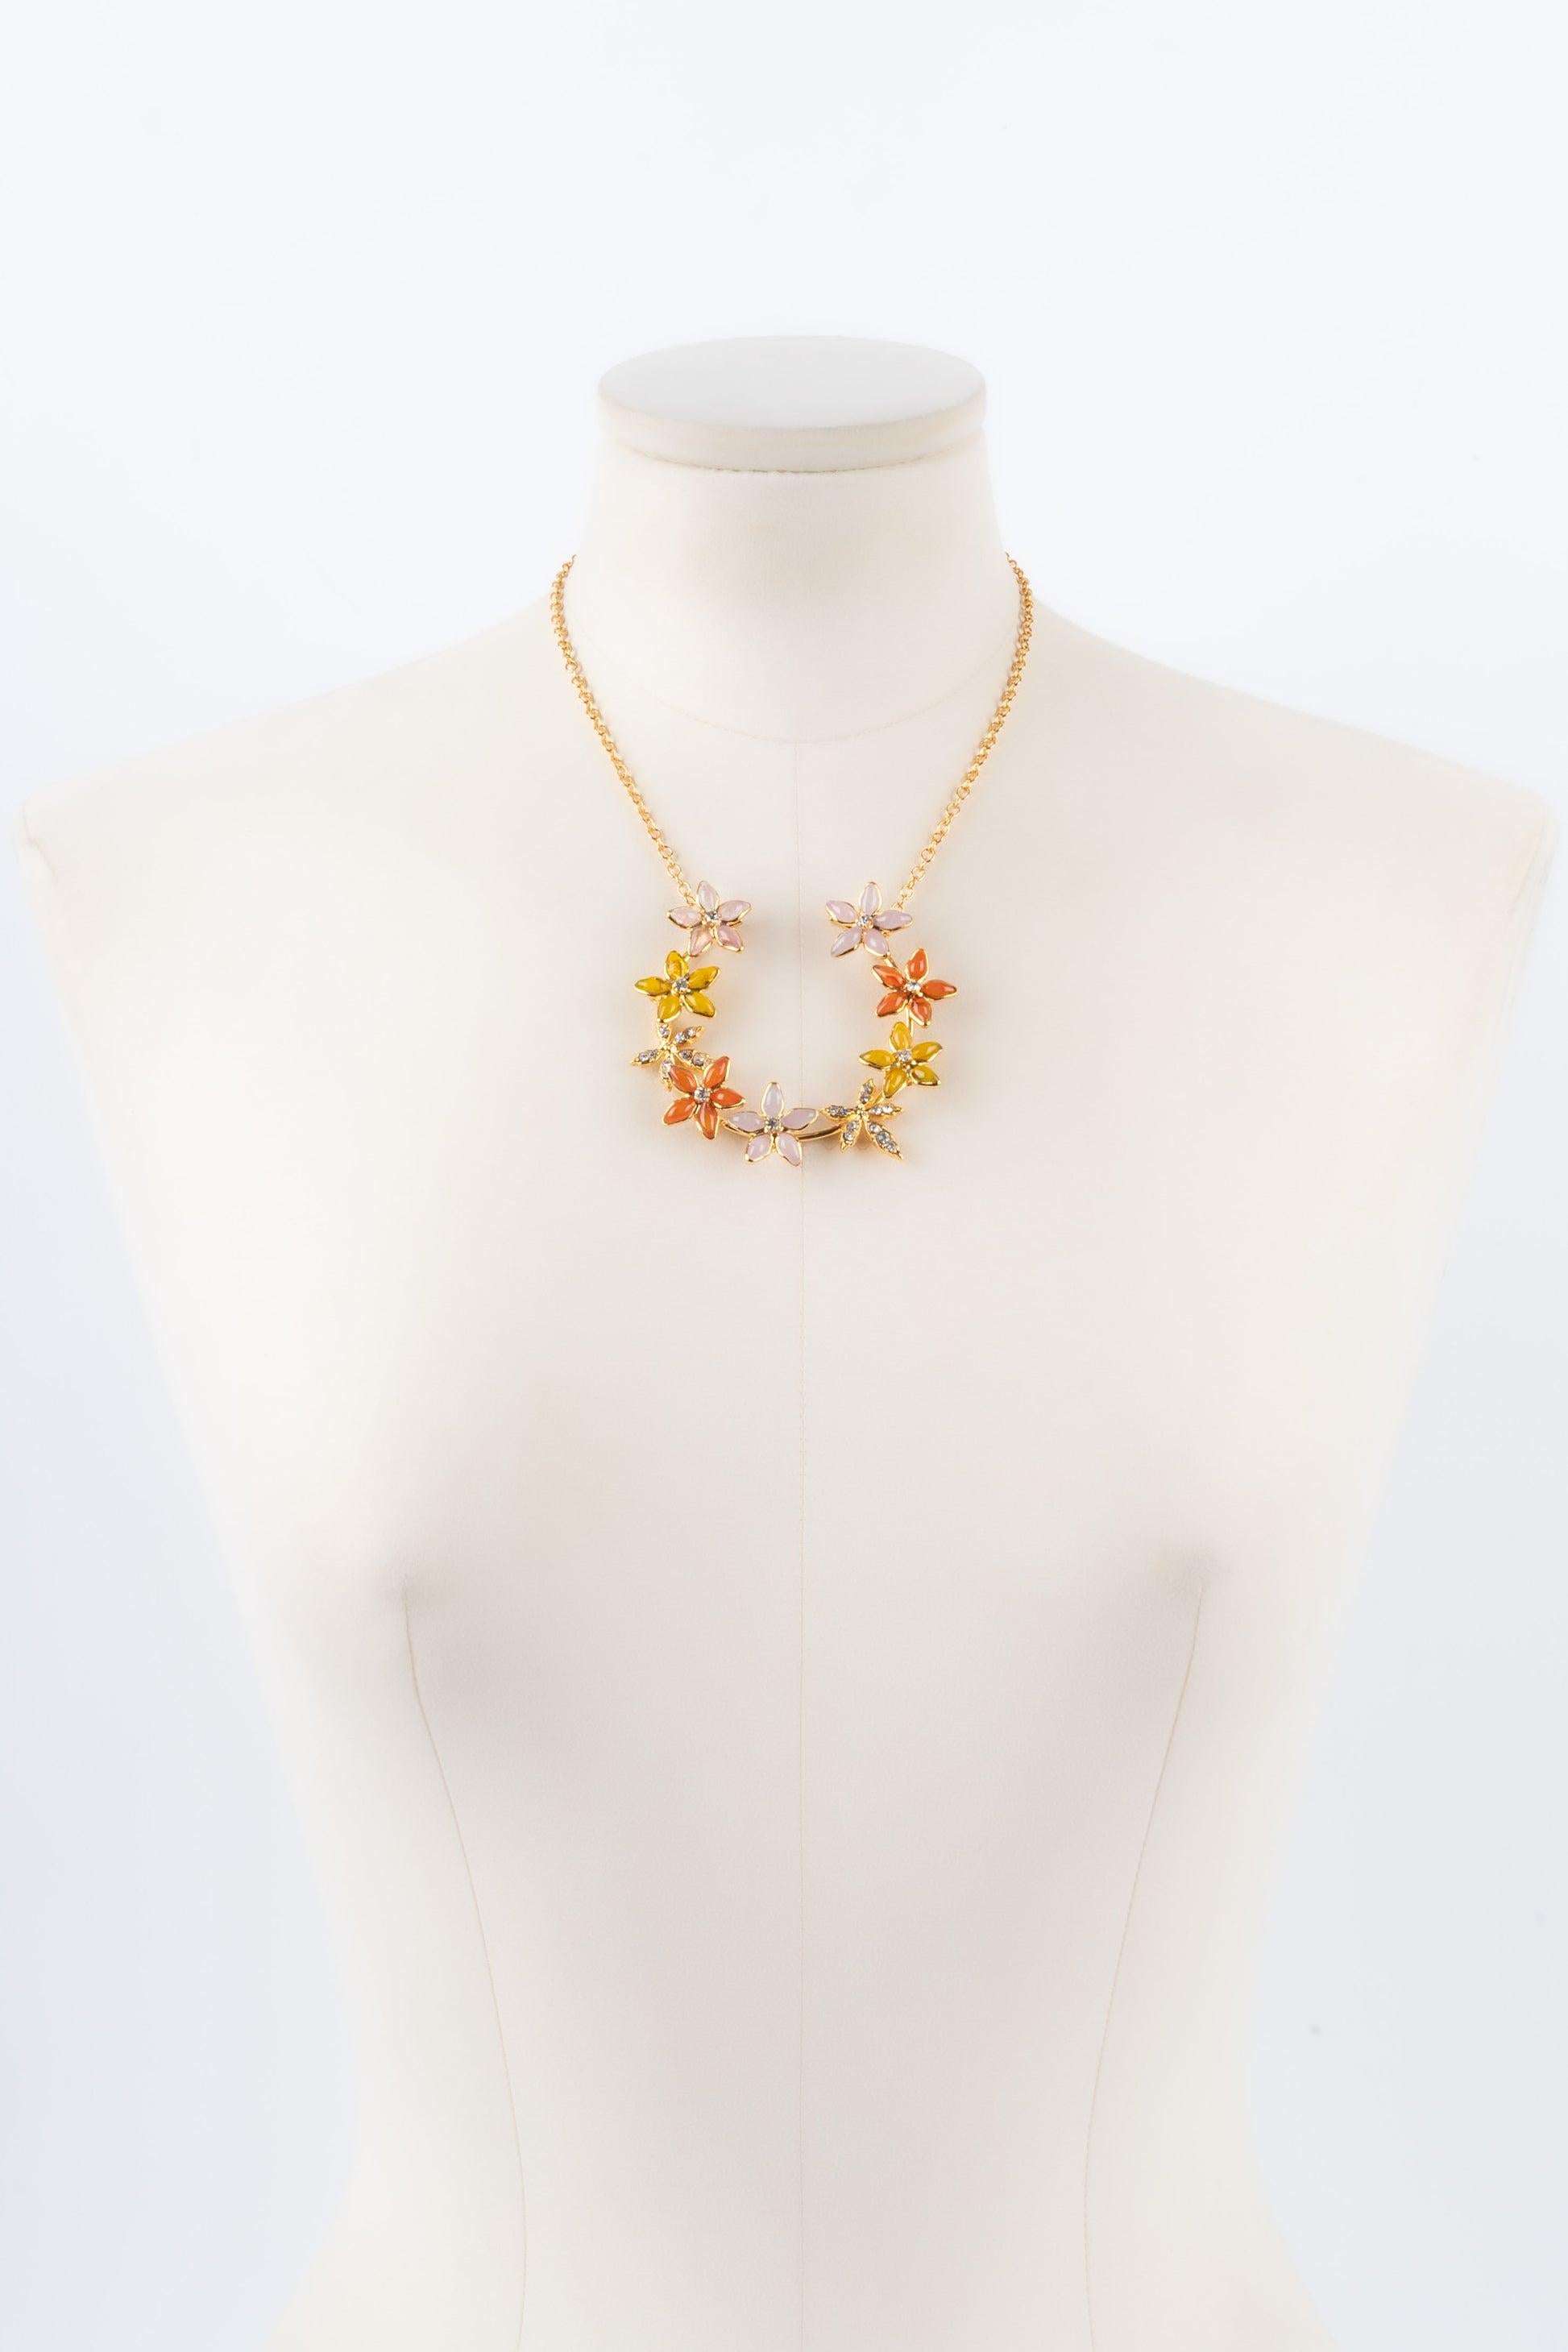 Augustine - Golden metal necklace with rhinestones and glass paste in yellow and orange tones.

Additional information:
Condition: Very good condition
Dimensions: Length: 38 cm to 43 cm

Seller Reference: BC237